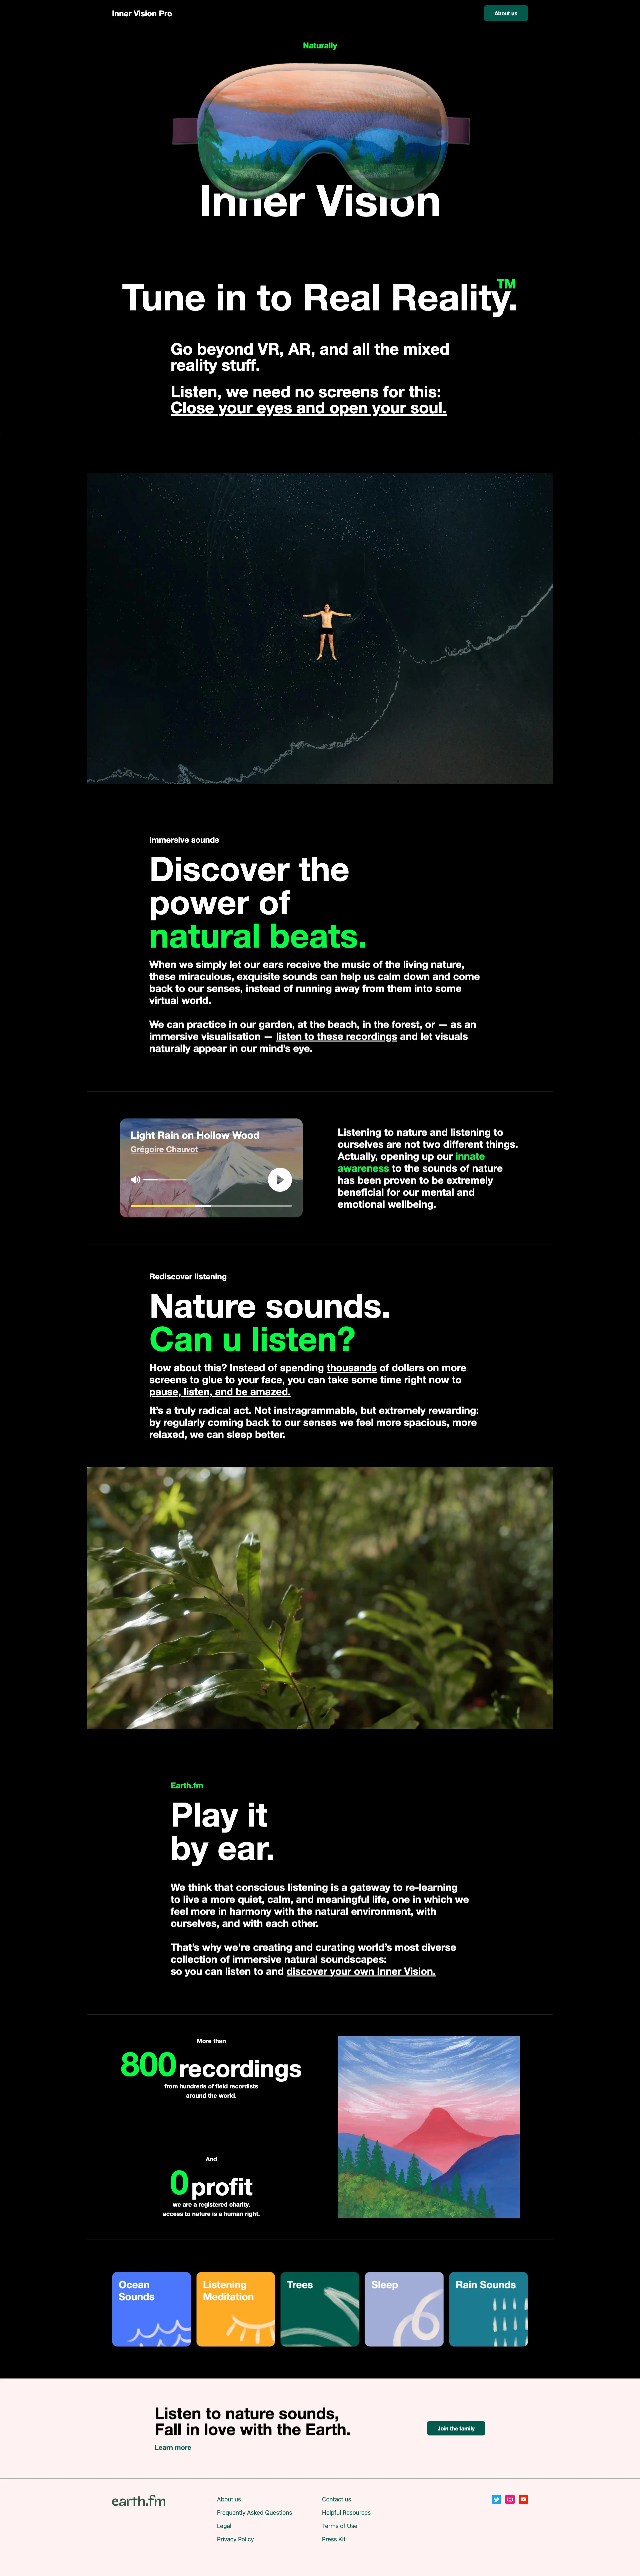 Inner Vision Pro Landing Page Example: Listen to nature sounds, Fall in love with the Earth. Instead of spending thousands on more screens to glue to your face, take a few moments right now to pause, listen, and be amazed.